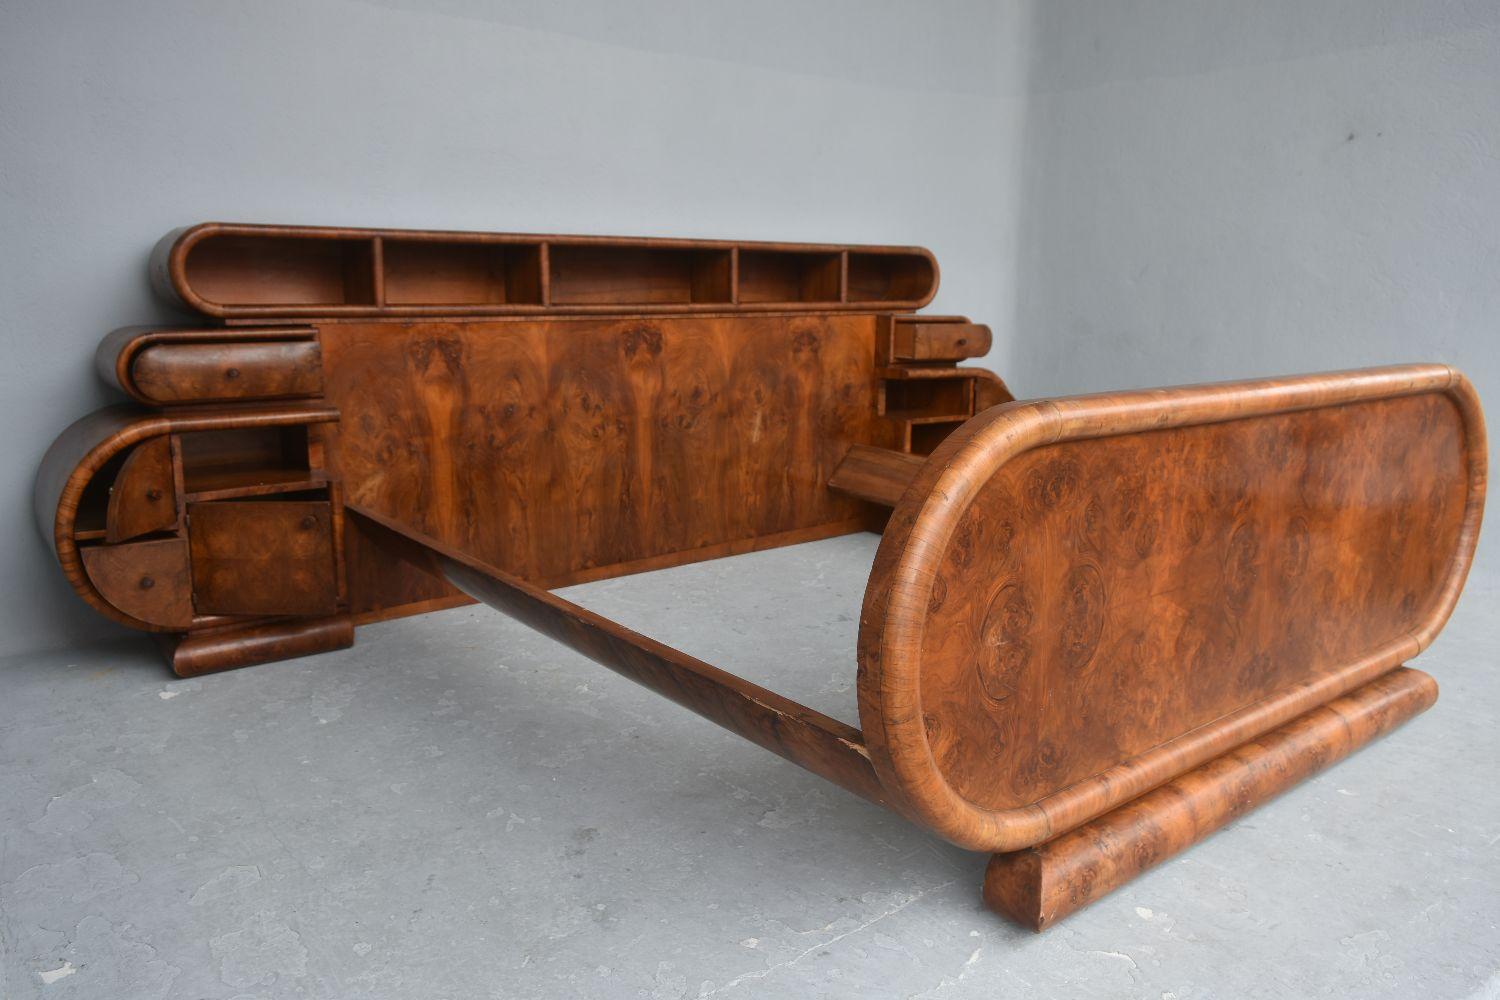 1930s Art Deco Hollywood Bed in Walnut Burl Veneer with its Curved 4